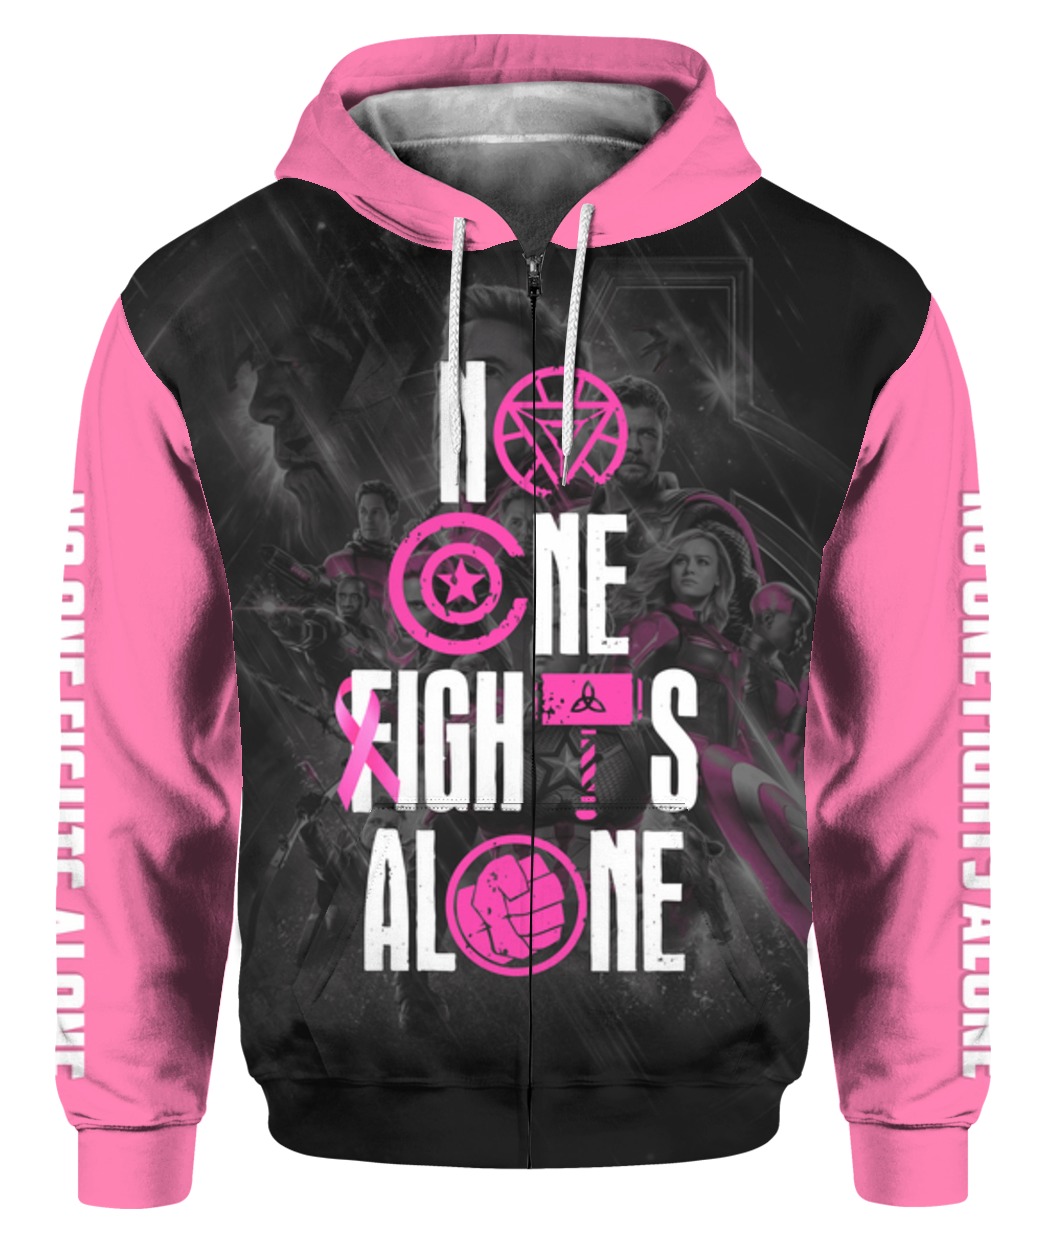 The avengers no one fights alone breast cancer awareness all over printed zip hoodie